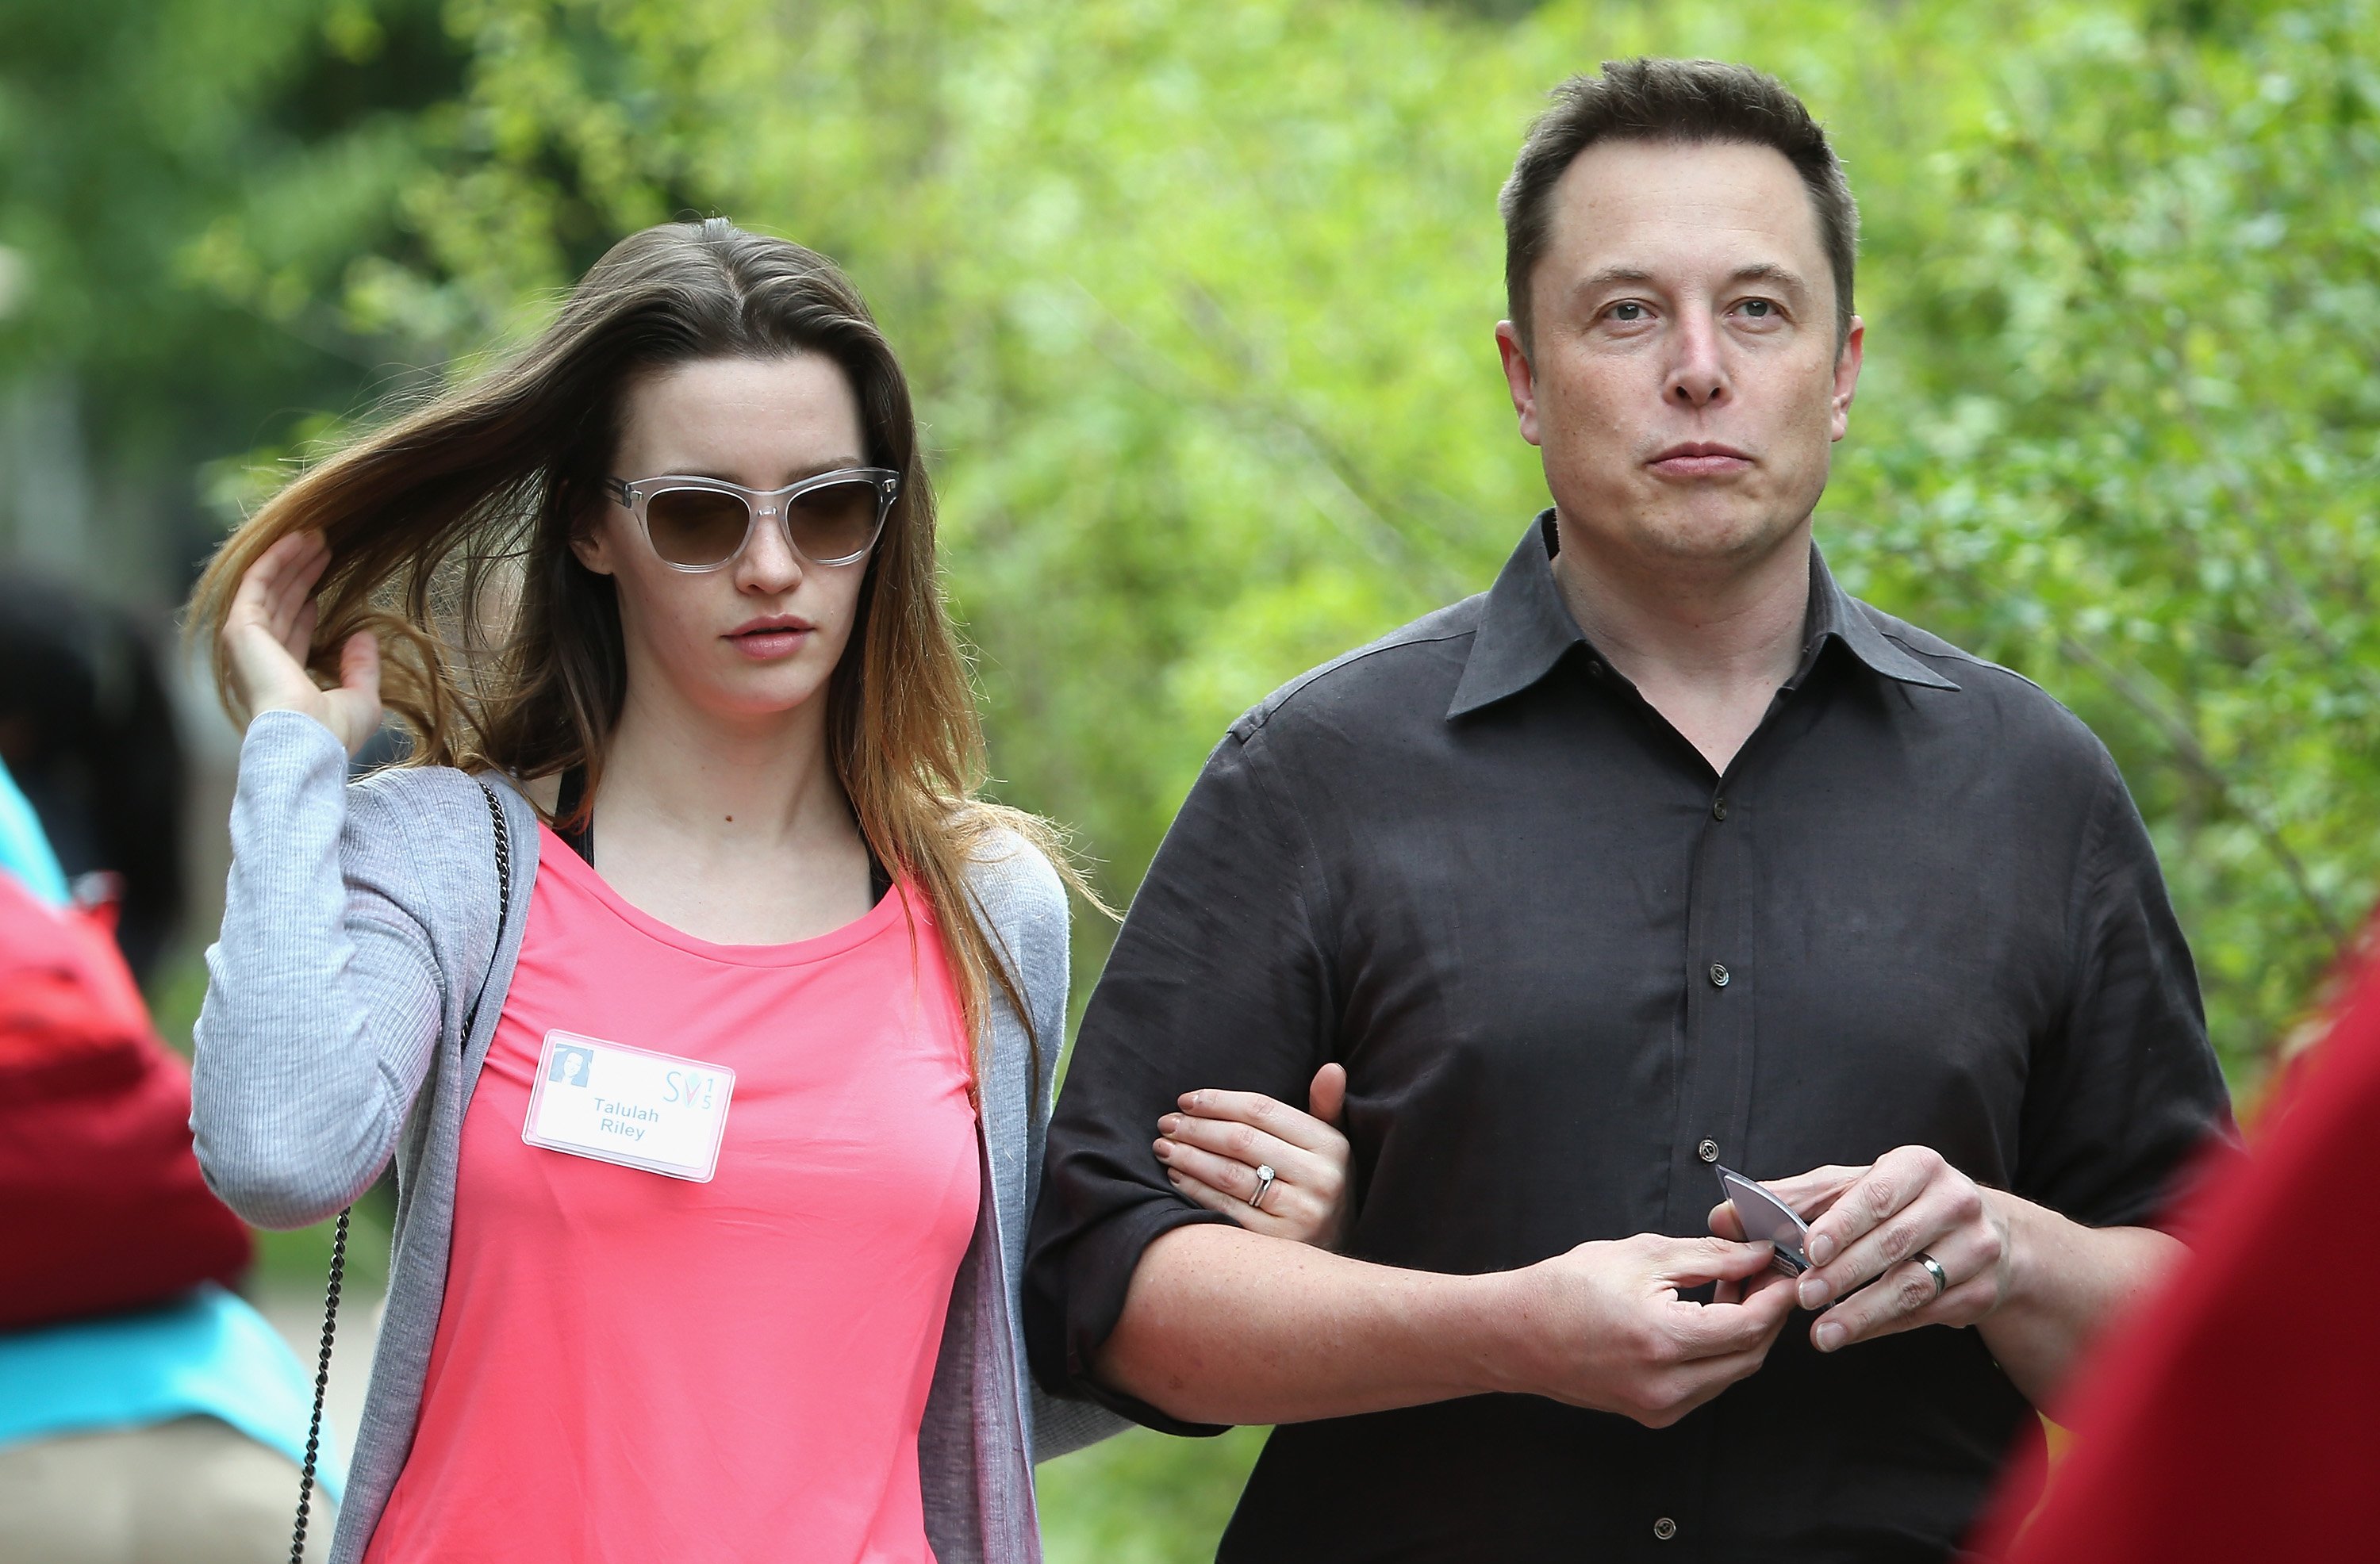 Elon Musk, CEO and CTO of SpaceX, CEO and product architect of Tesla Motors, and chairman of SolarCity, and his wife Talulah Riley attend the Allen & Company Sun Valley Conference on July 8, 2015 in Sun Valley, Idaho. | Source: Getty Images